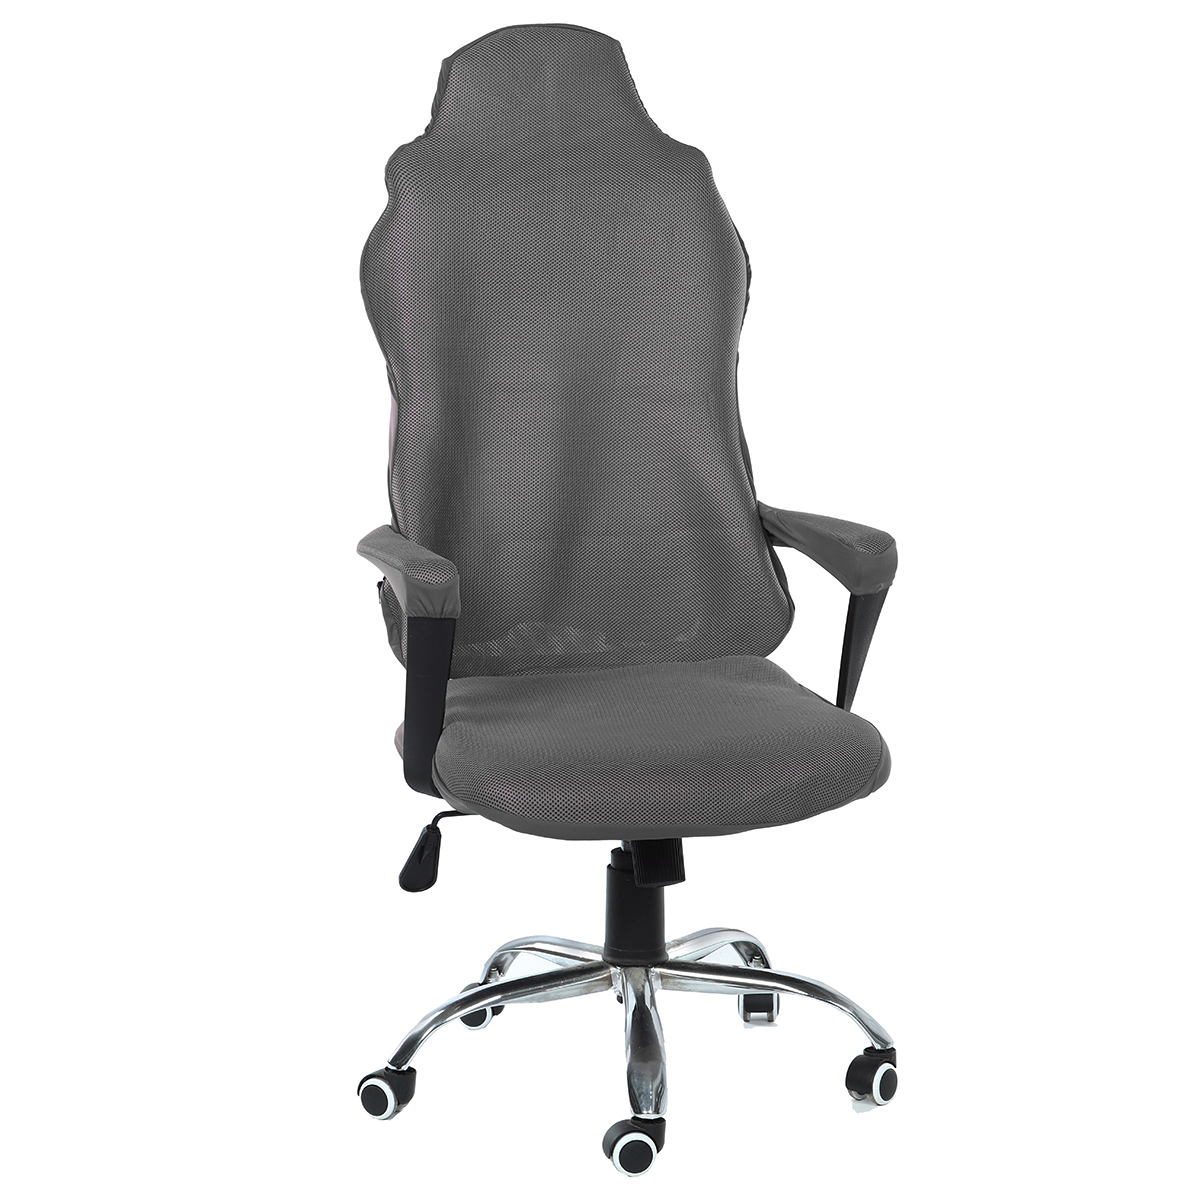 Mesh-Gaming-Chair-Elastic-Chair-Cover-Office-Chair-Dustproof-Chair-Cover-Home-Office-Solid-Color-Cha-1827333-6